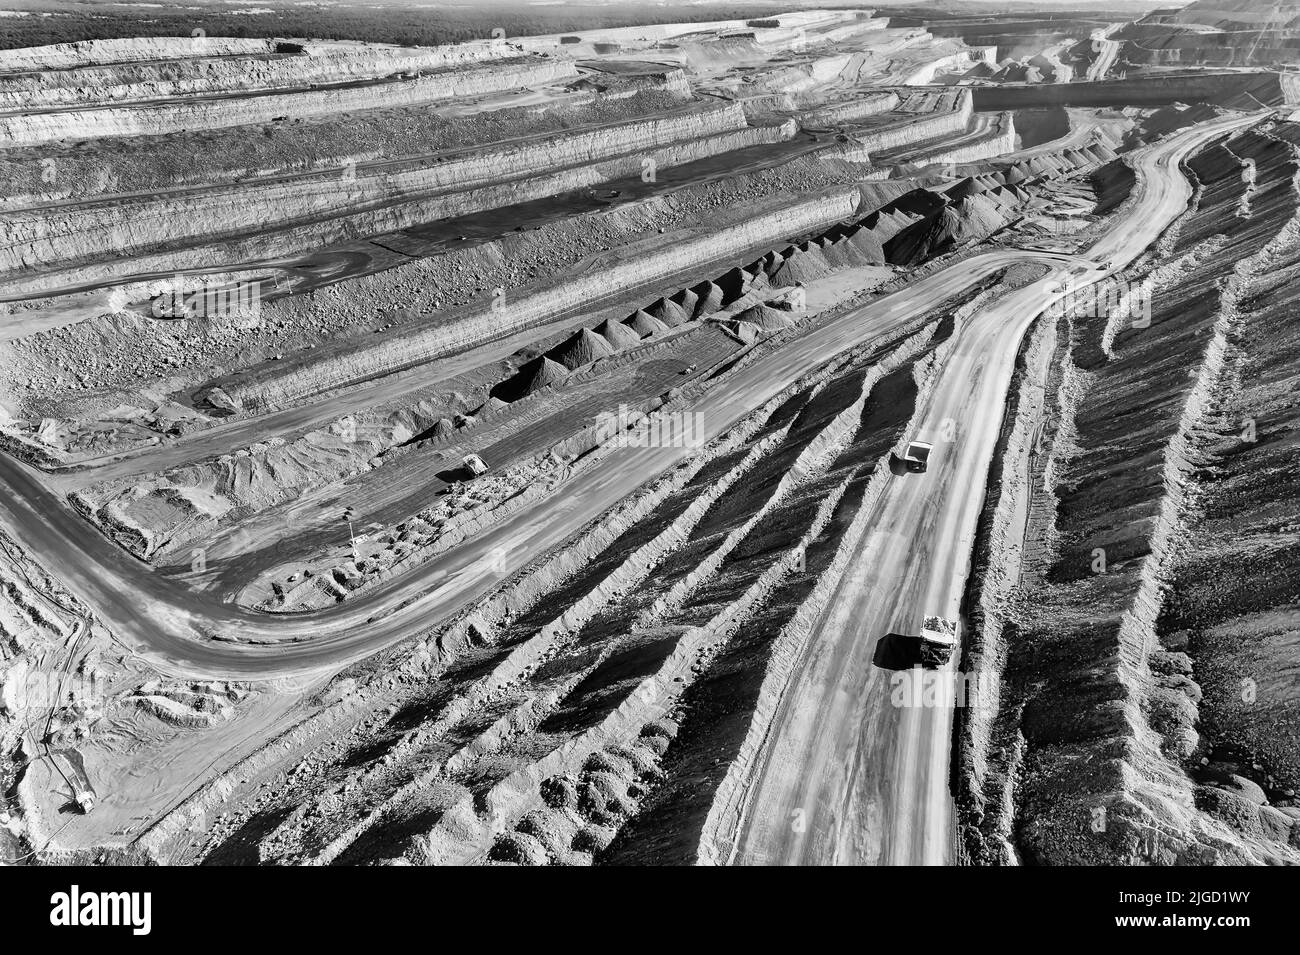 Deep excavated open pit black coal iron ore mine in NSW of Australia Hunter valley - aerial view of trucks and excavators. Stock Photo